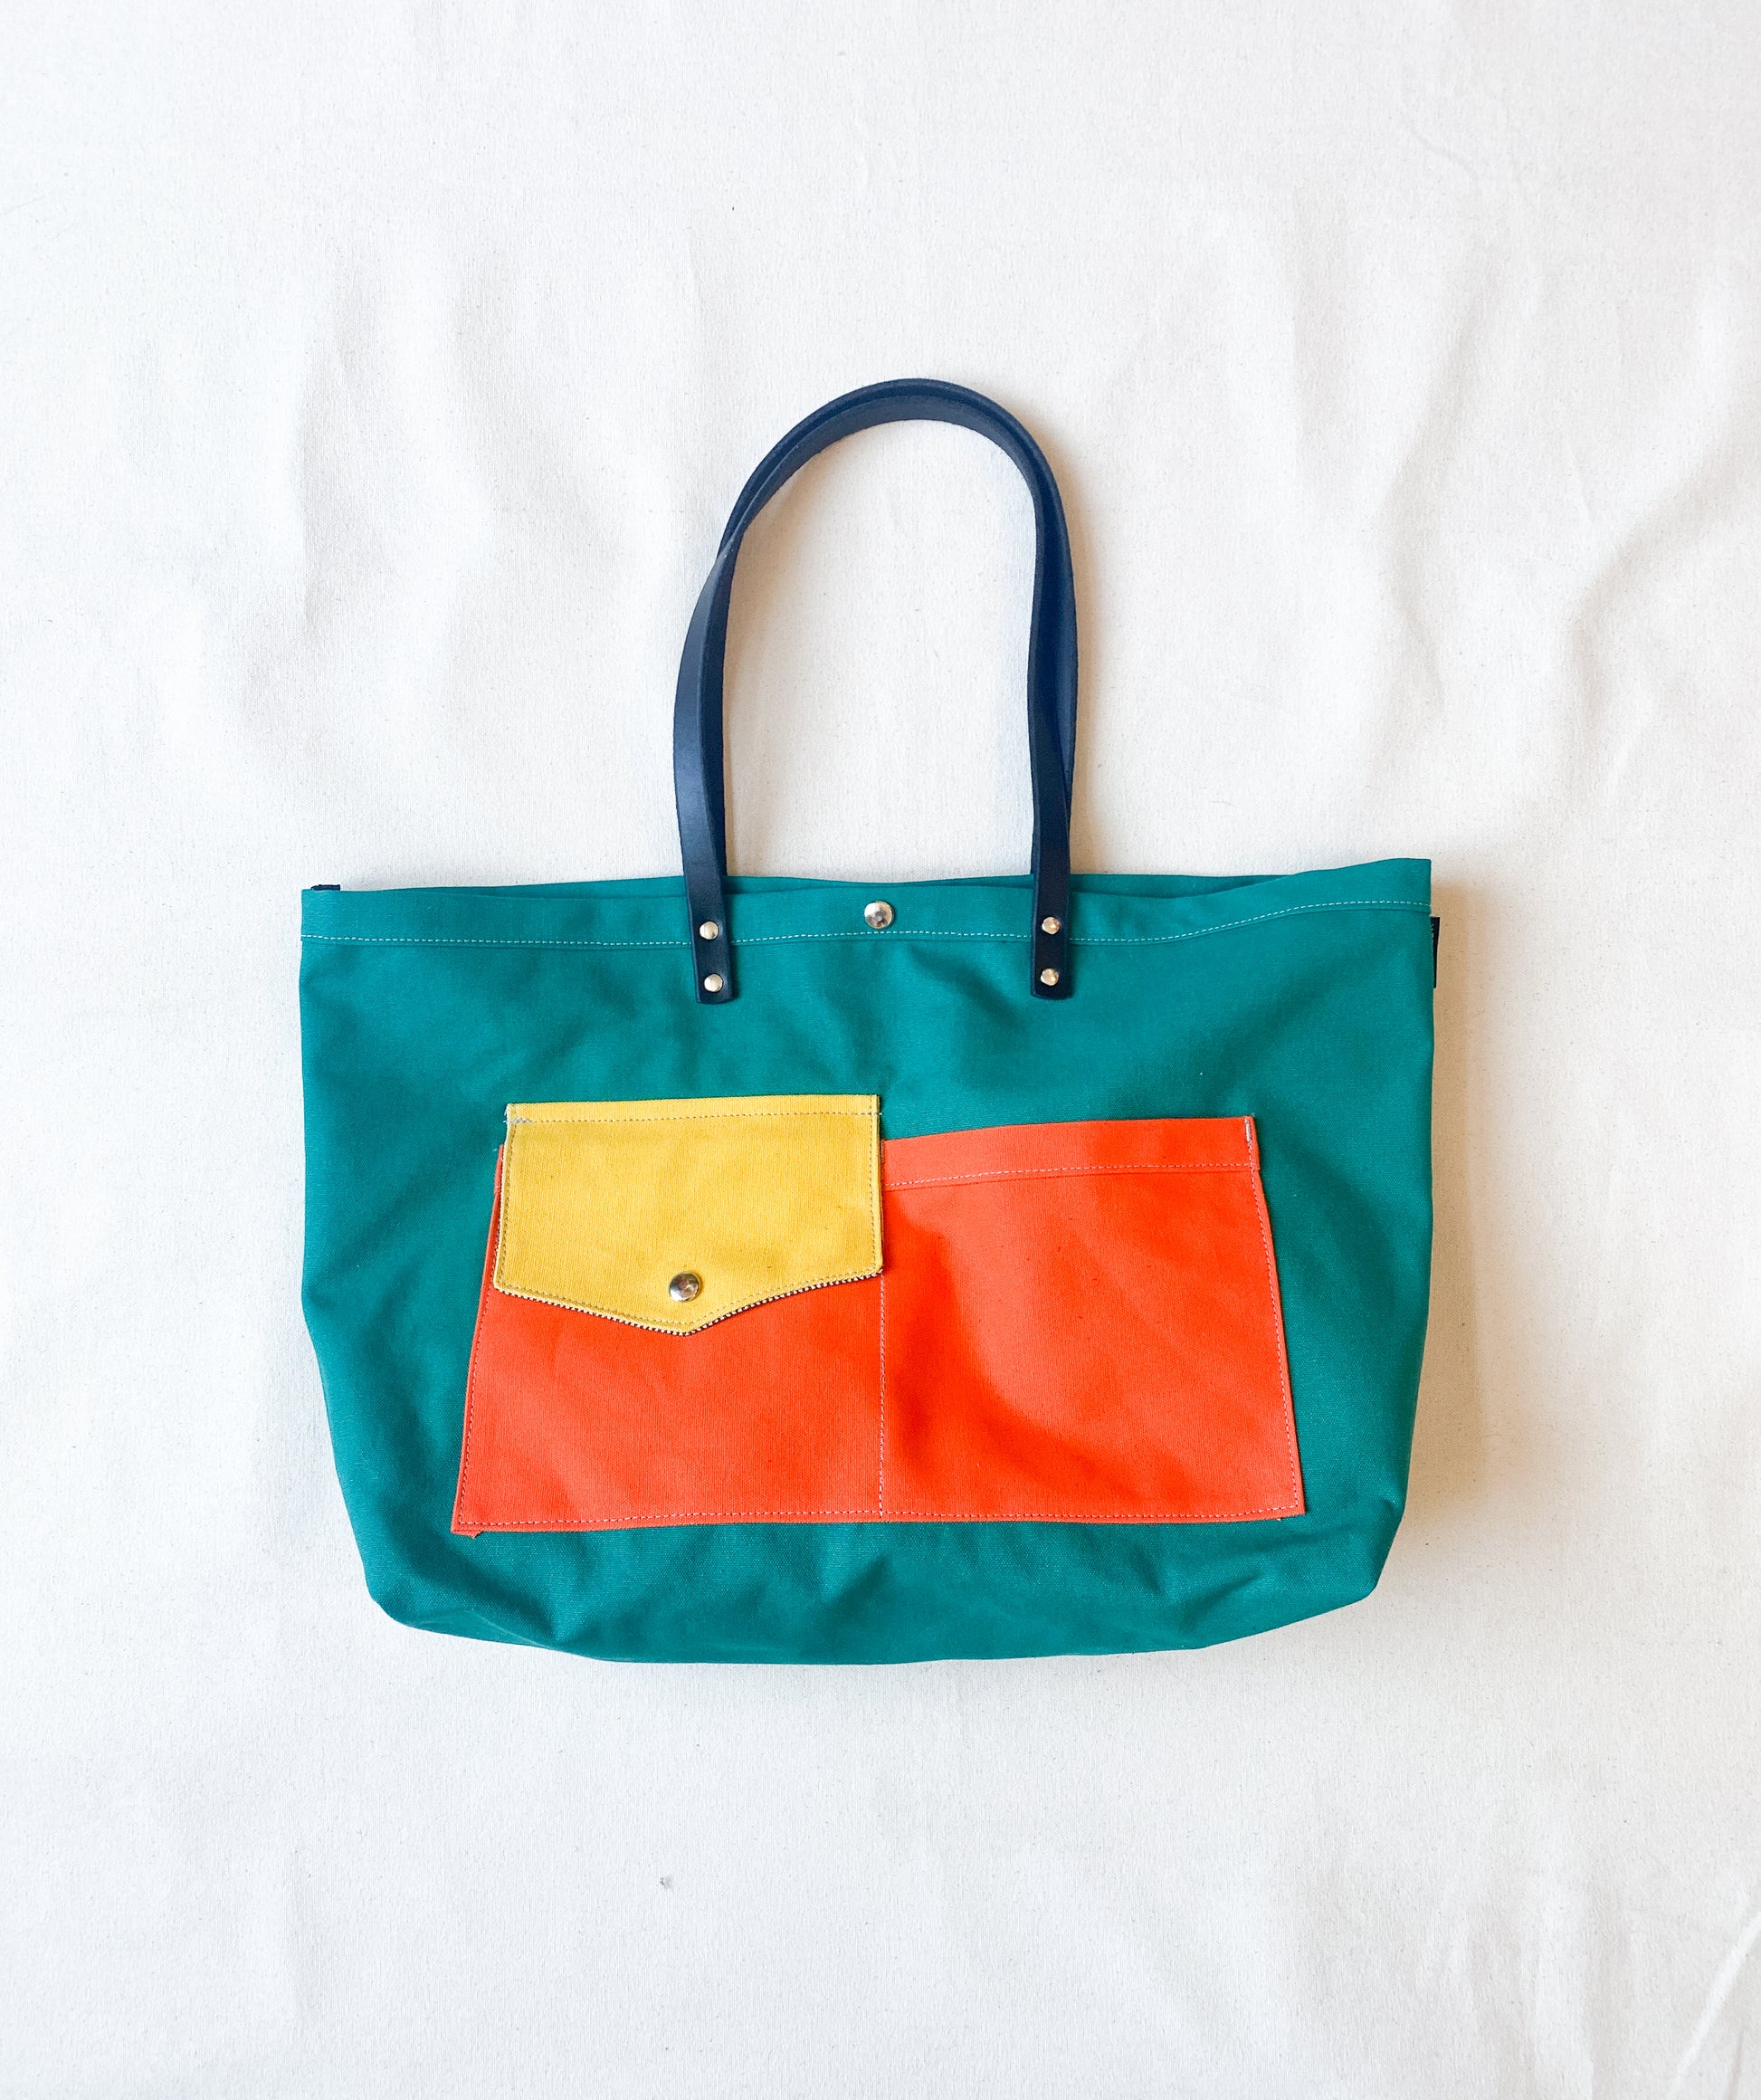 Multi-color (yellow, orange, teal) canvas beach tote with leather straps. 